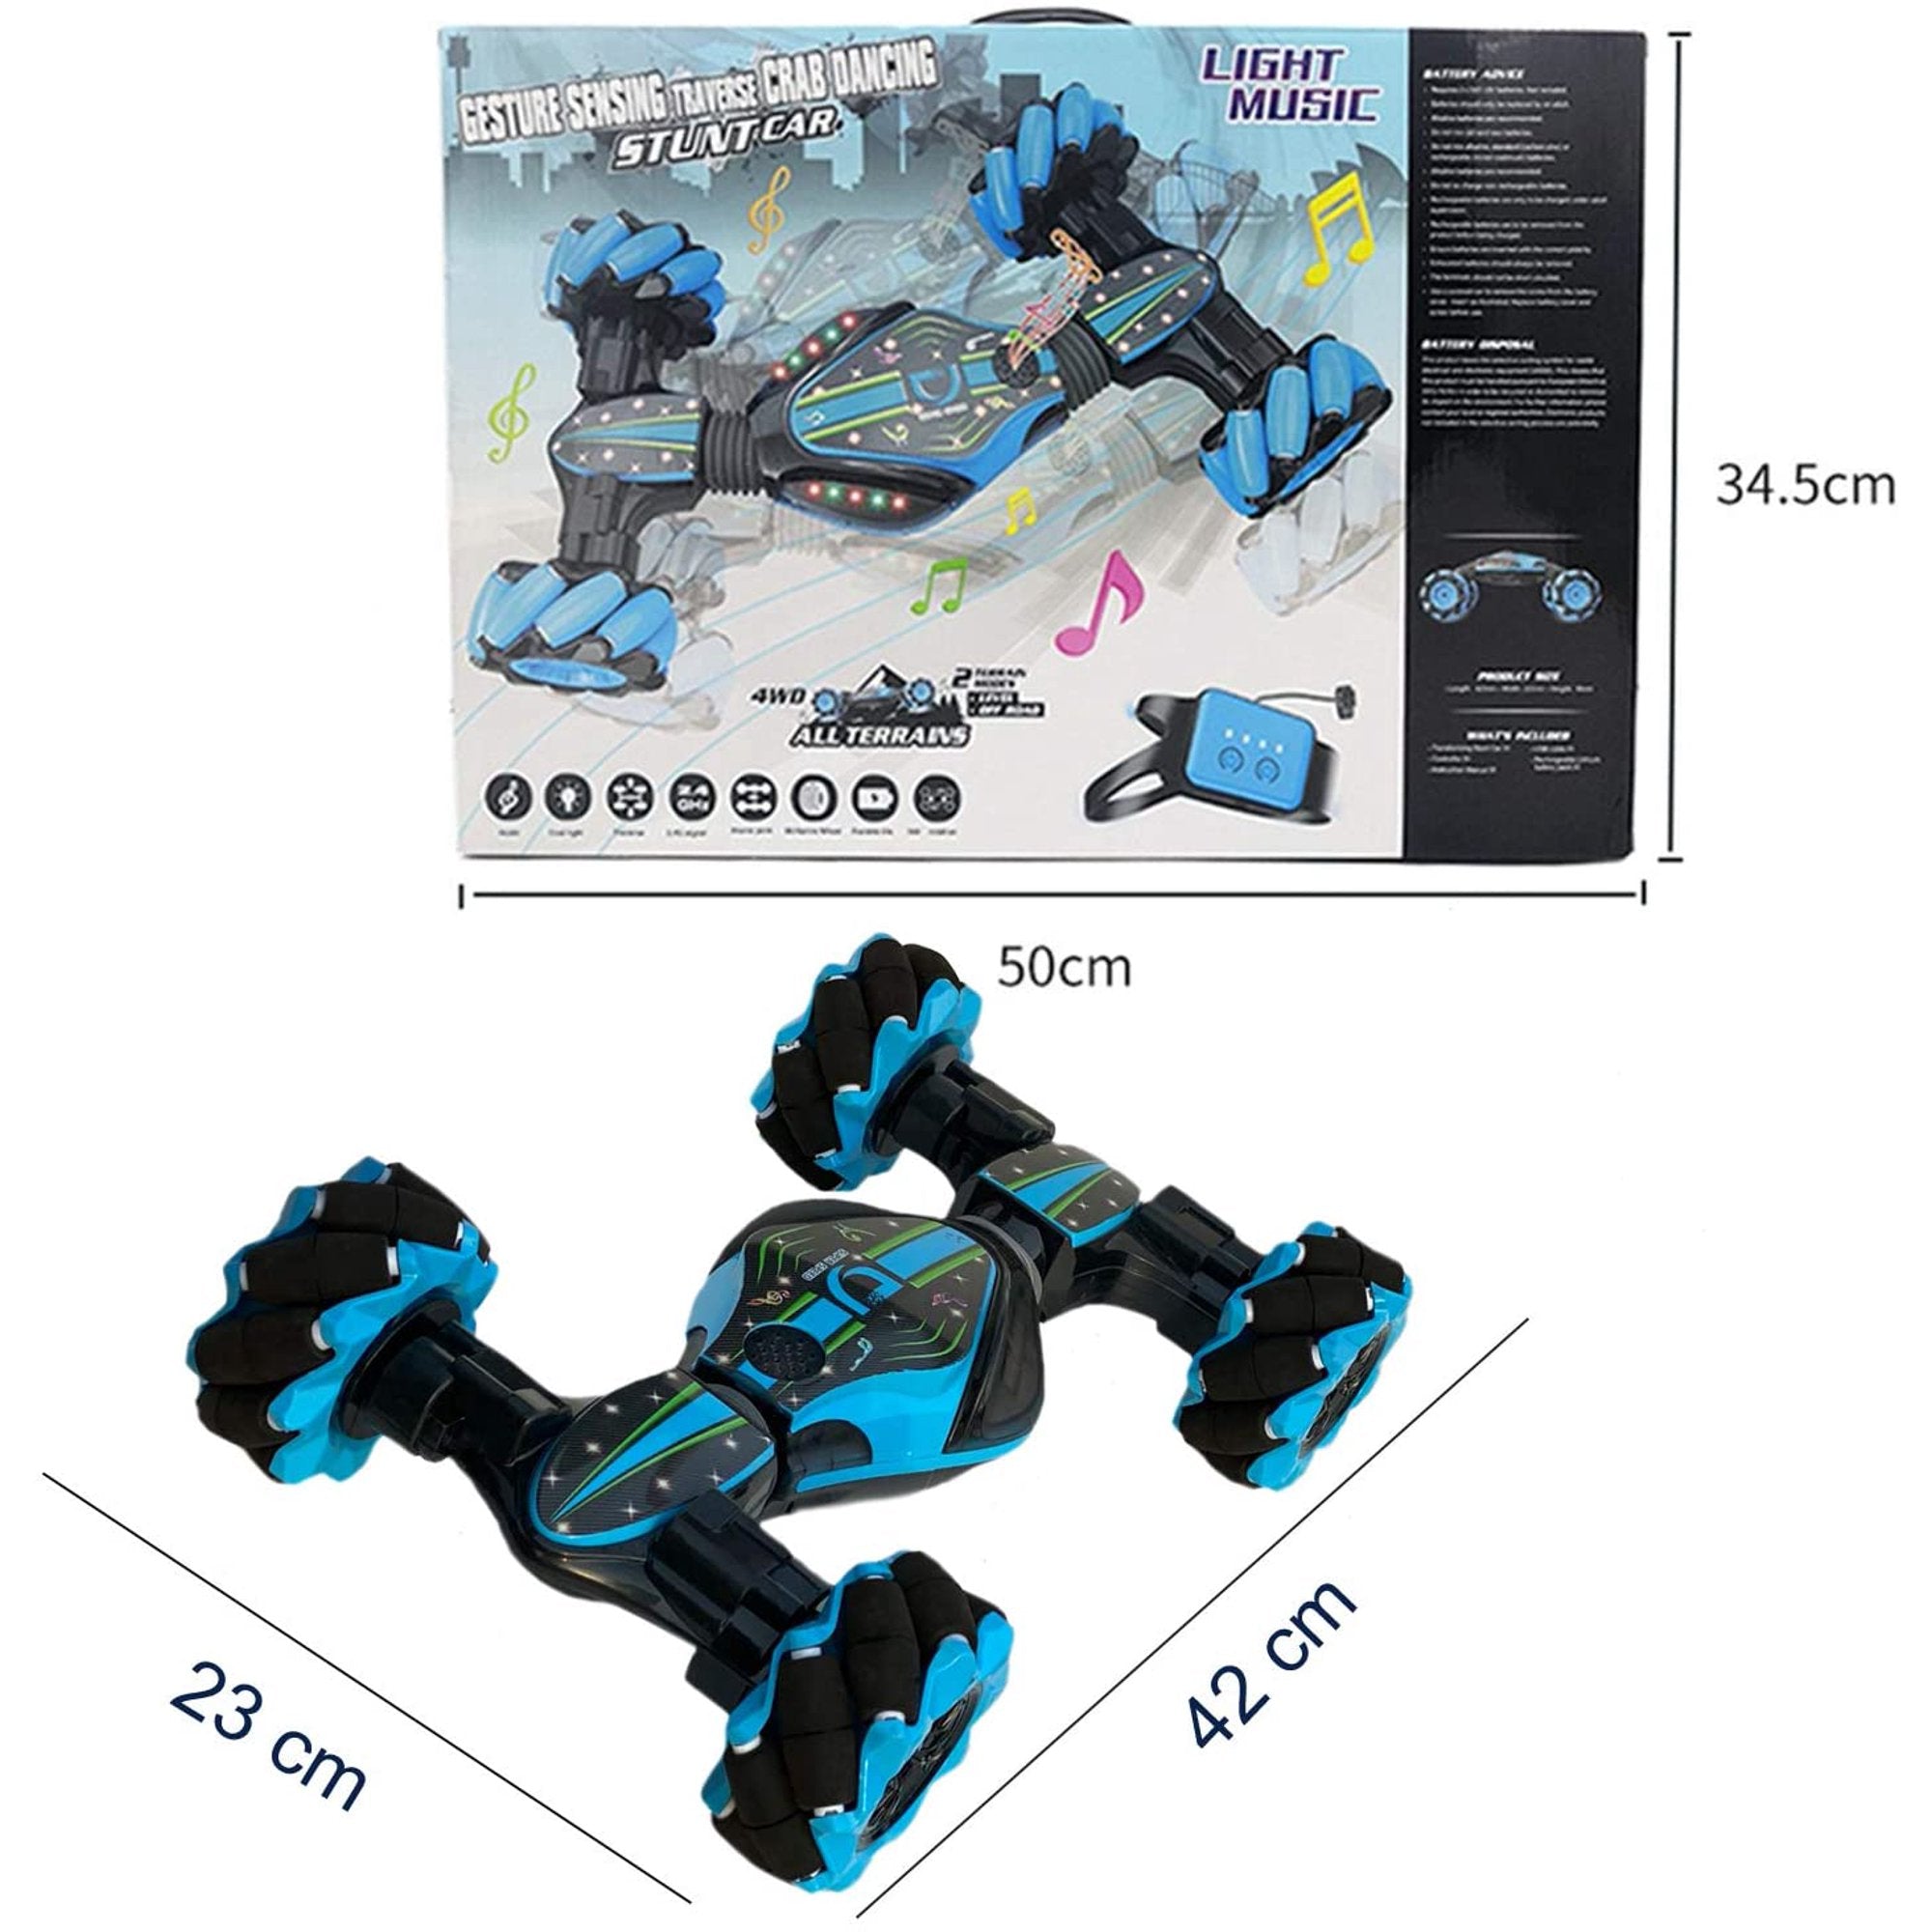 Terra RC Stunt Gesture Sensing Climbing .Car for Kids with Off-Road, Sports Mode, 40 Min Standby Suitable for Any Terrain, 2.4G Gesture Controlled Double-Sided Remote-Control Toy | Blue